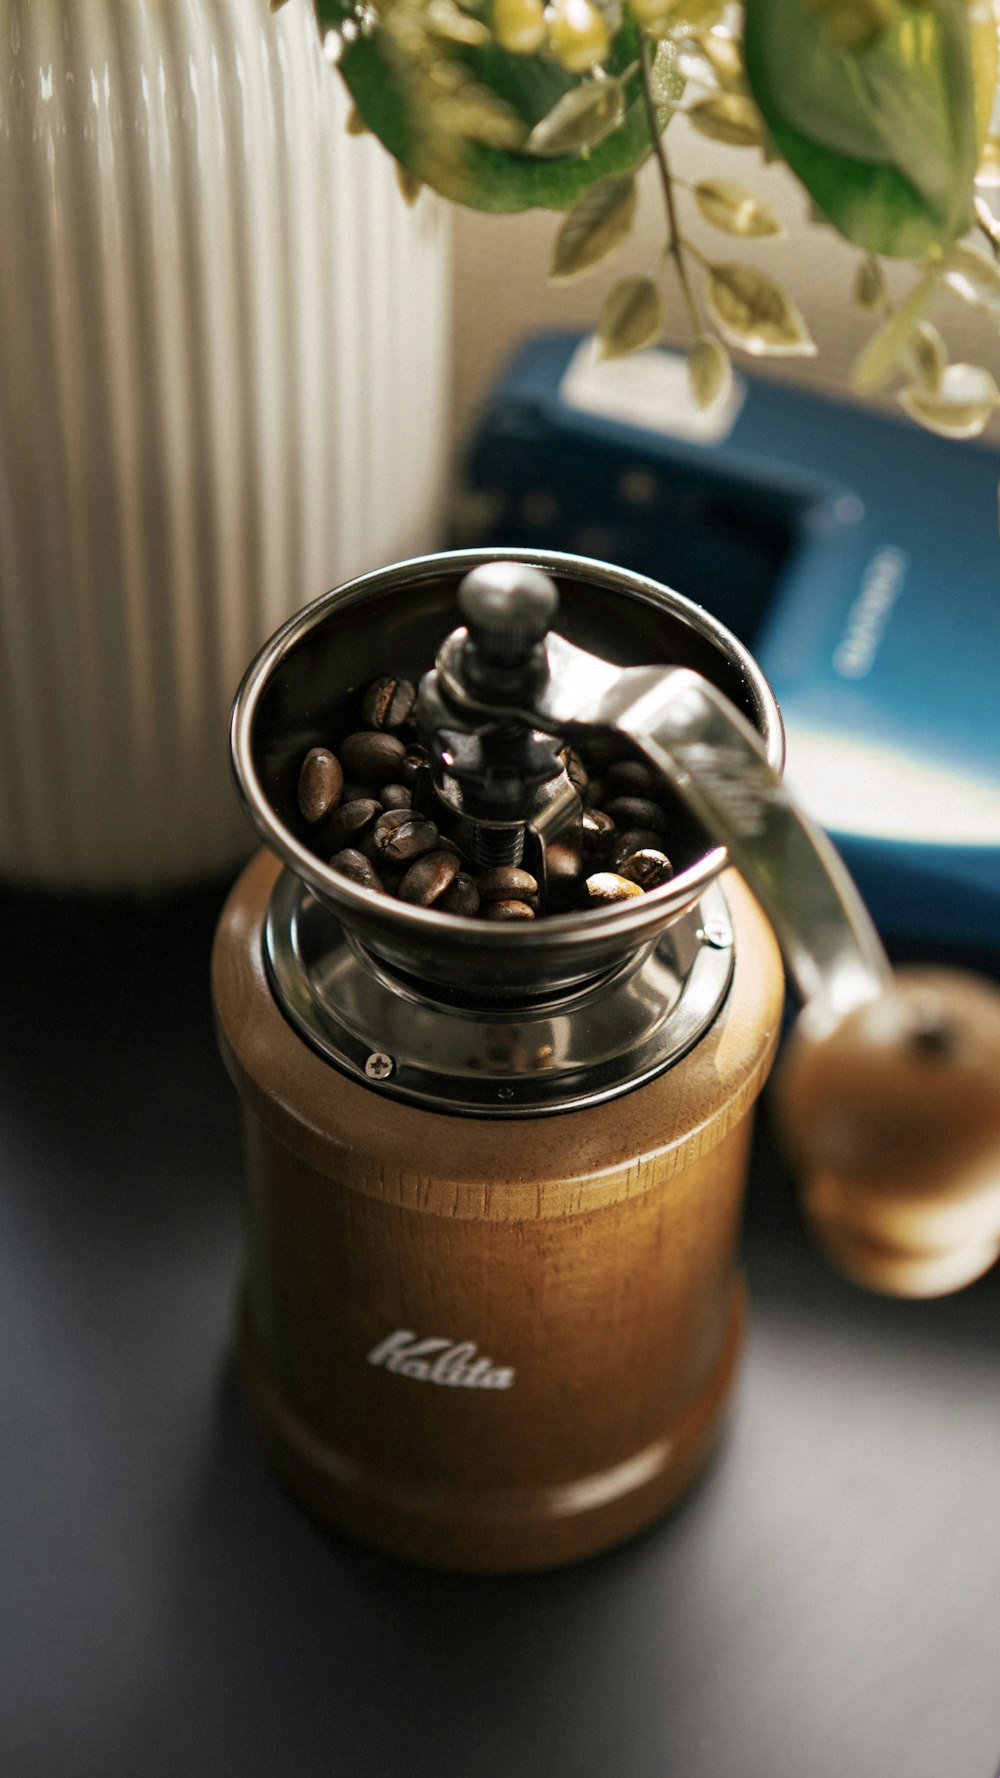 a coffee grinder sitting on top of a table next to a vase of flowers